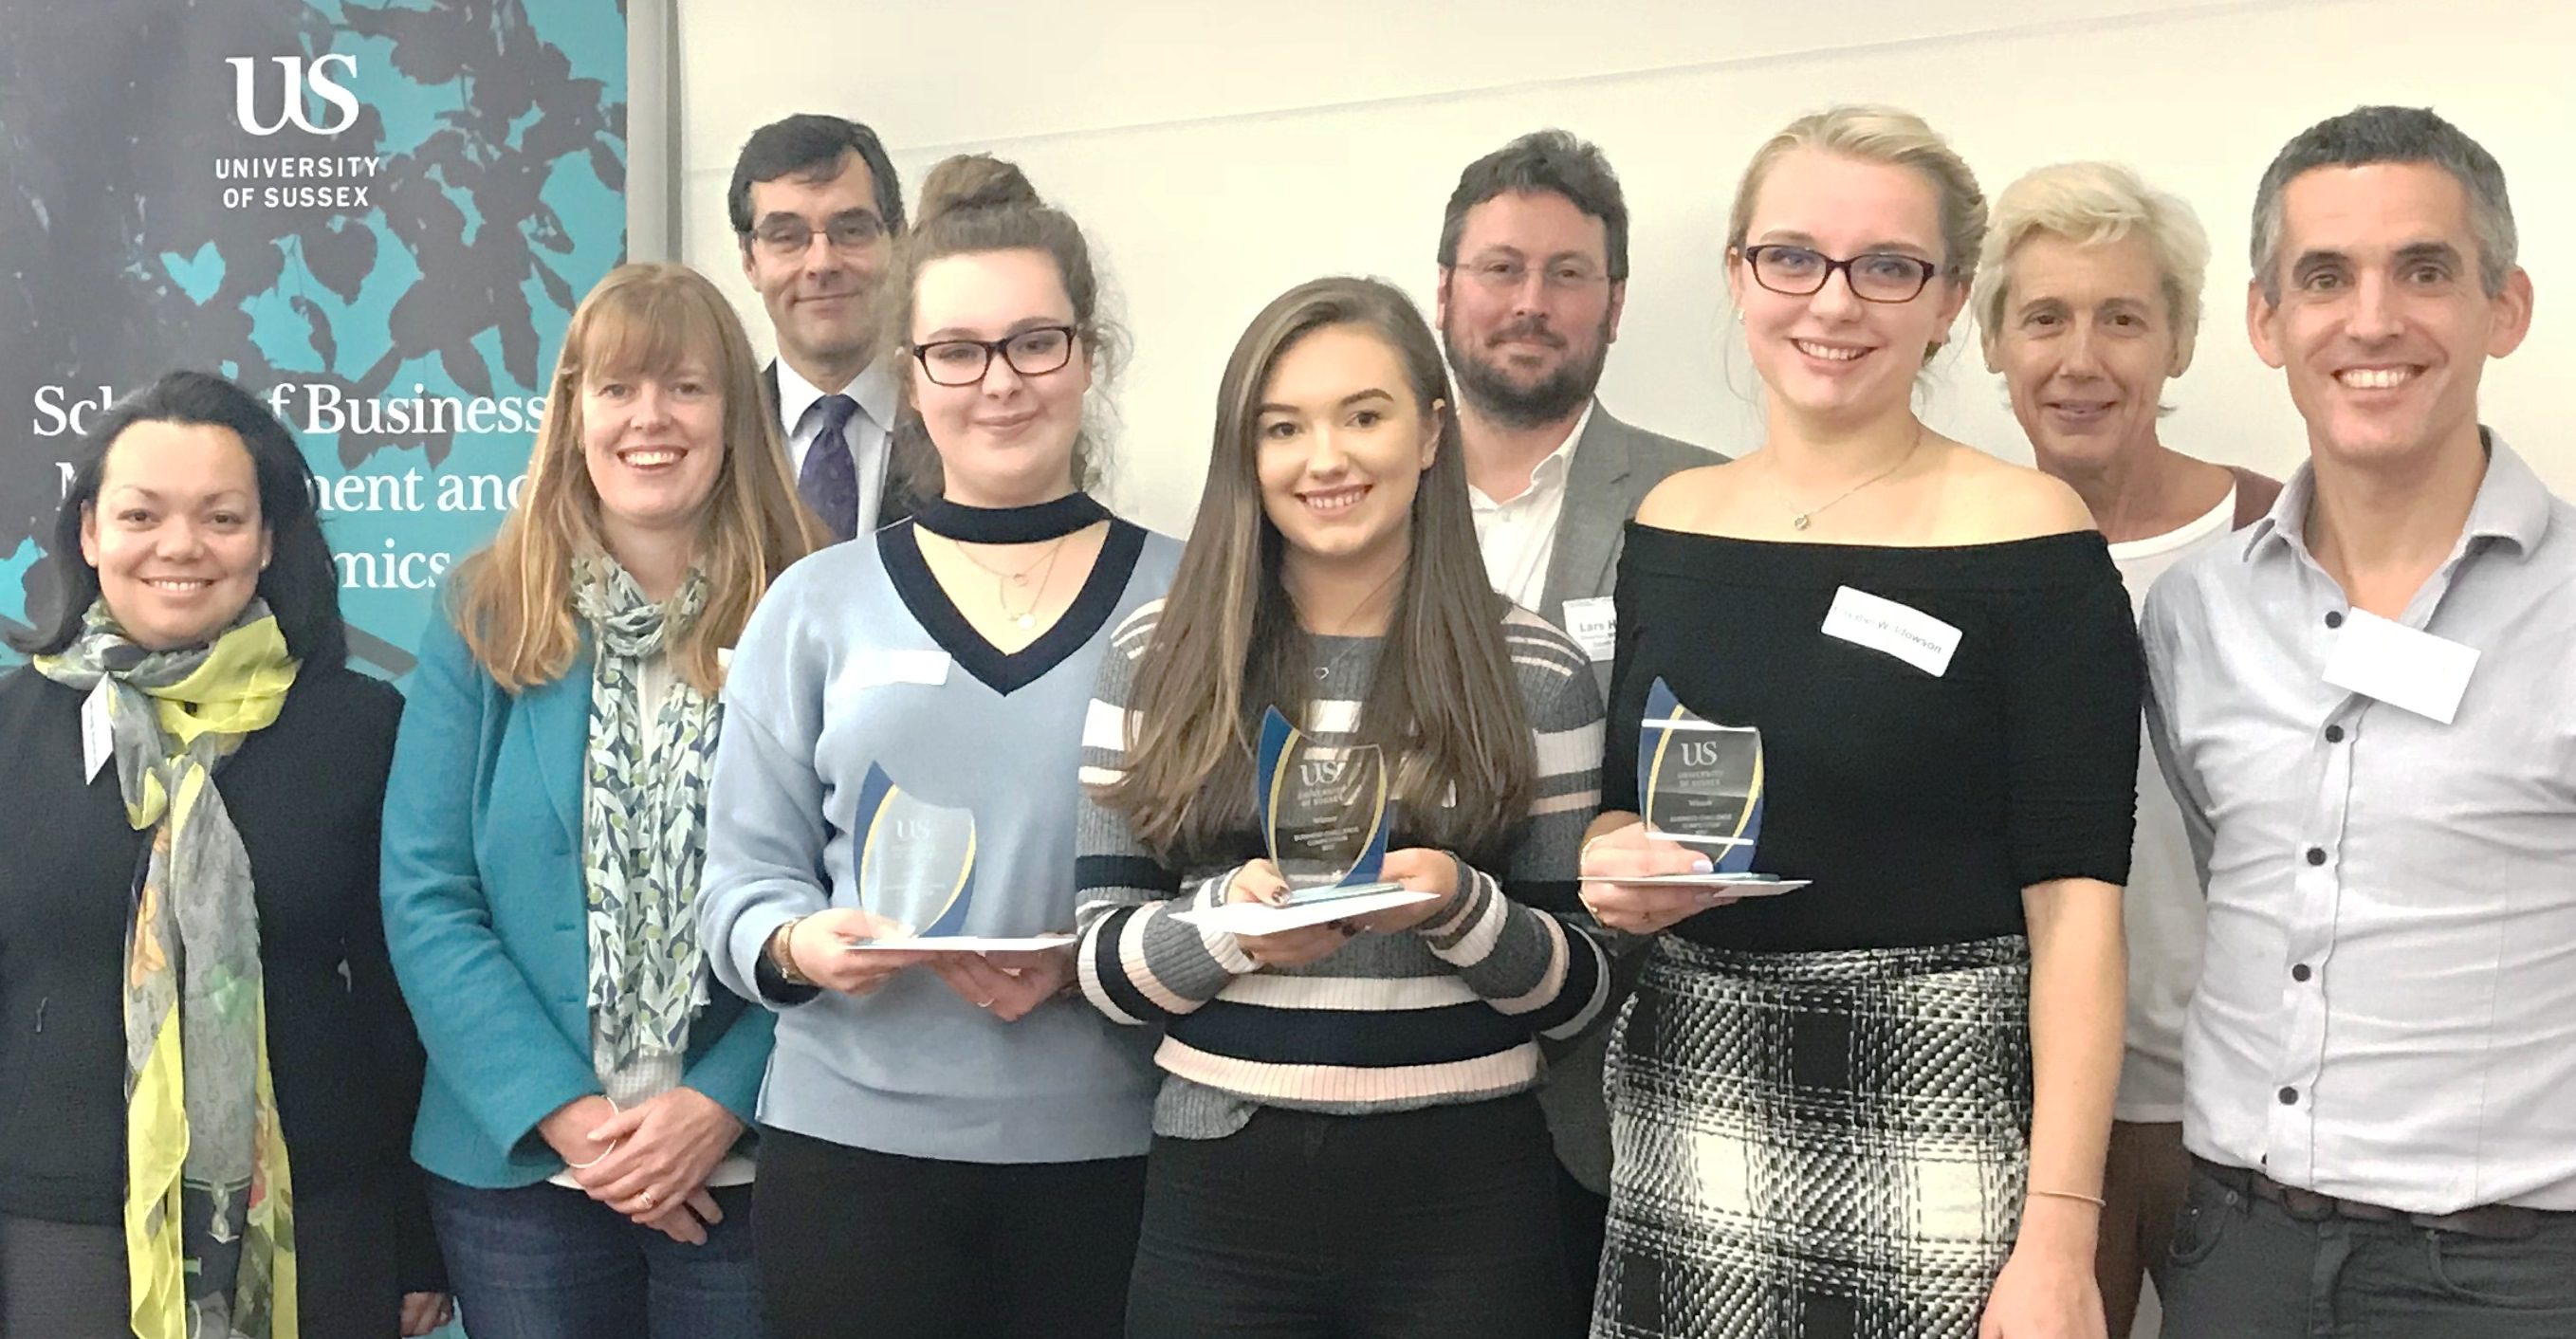 Winners and judges of the 2017 Business Challenge